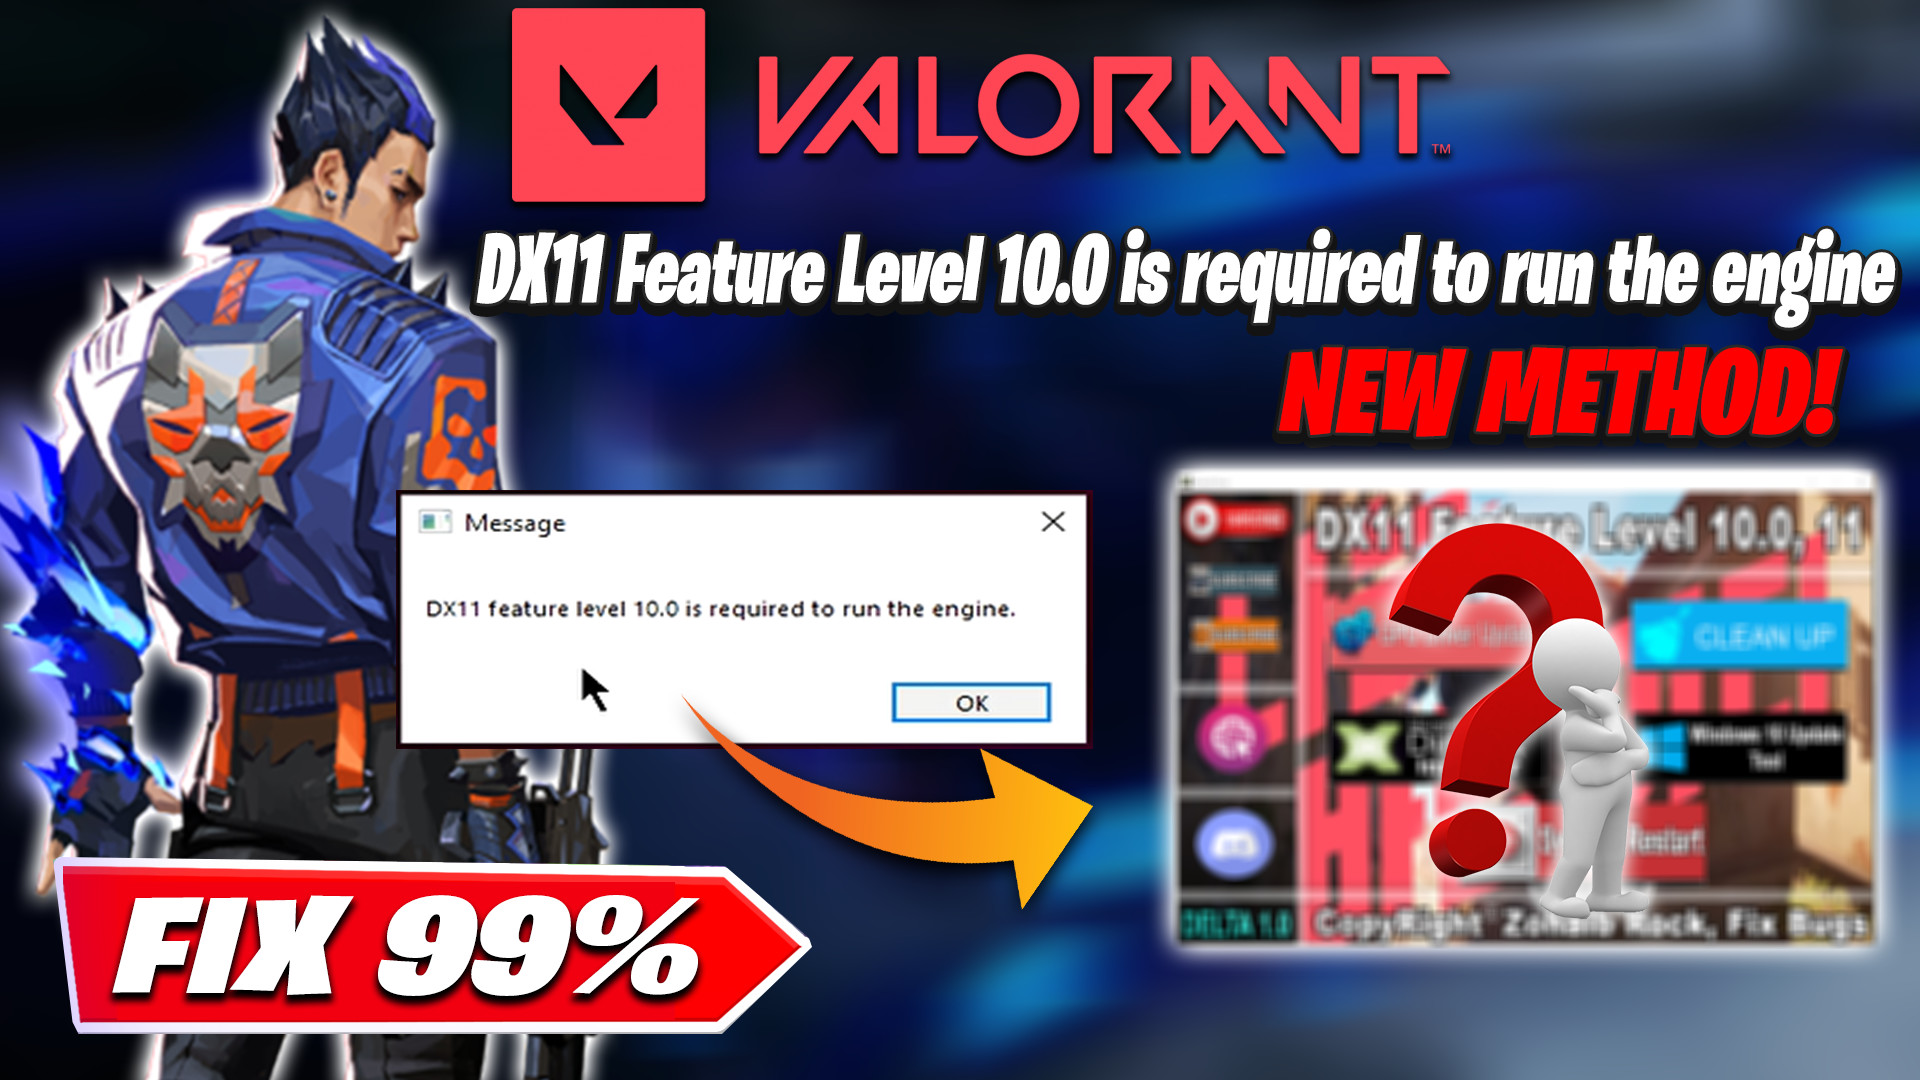 Feature level 11 1. Dx11 feature Level 10.0 is required to Run the engine valorant. Dx11 feature Level 10.0 is required to Run the engine как исправить. A d3d11-compatible GPU (feature Level 11.0,Shader model 5.0) is required to Run the engine valorant.